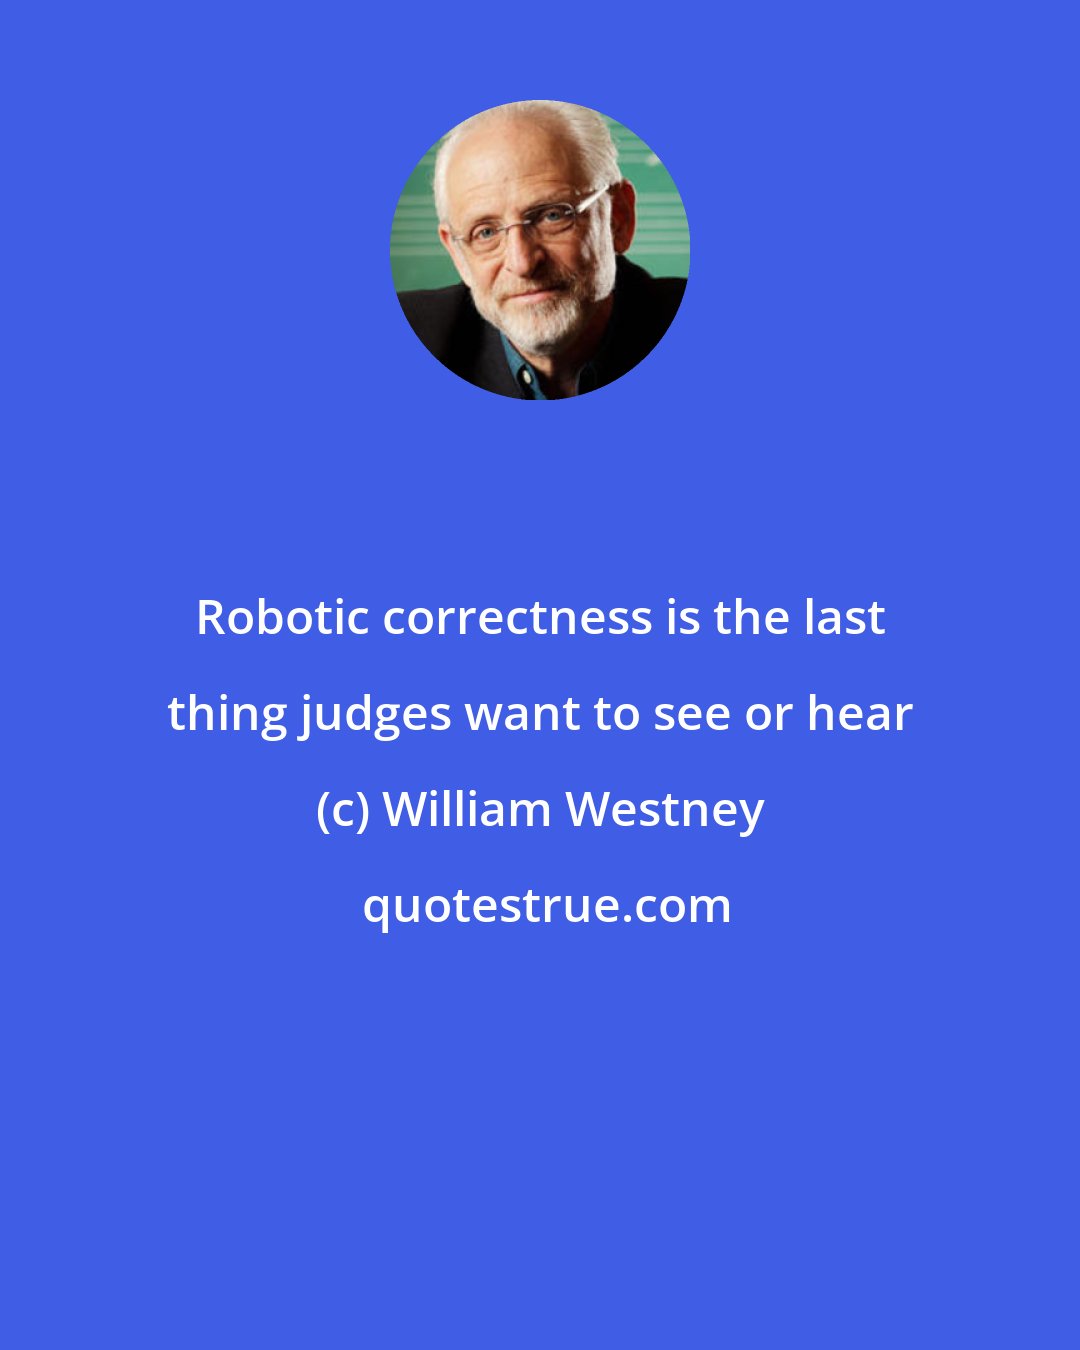 William Westney: Robotic correctness is the last thing judges want to see or hear